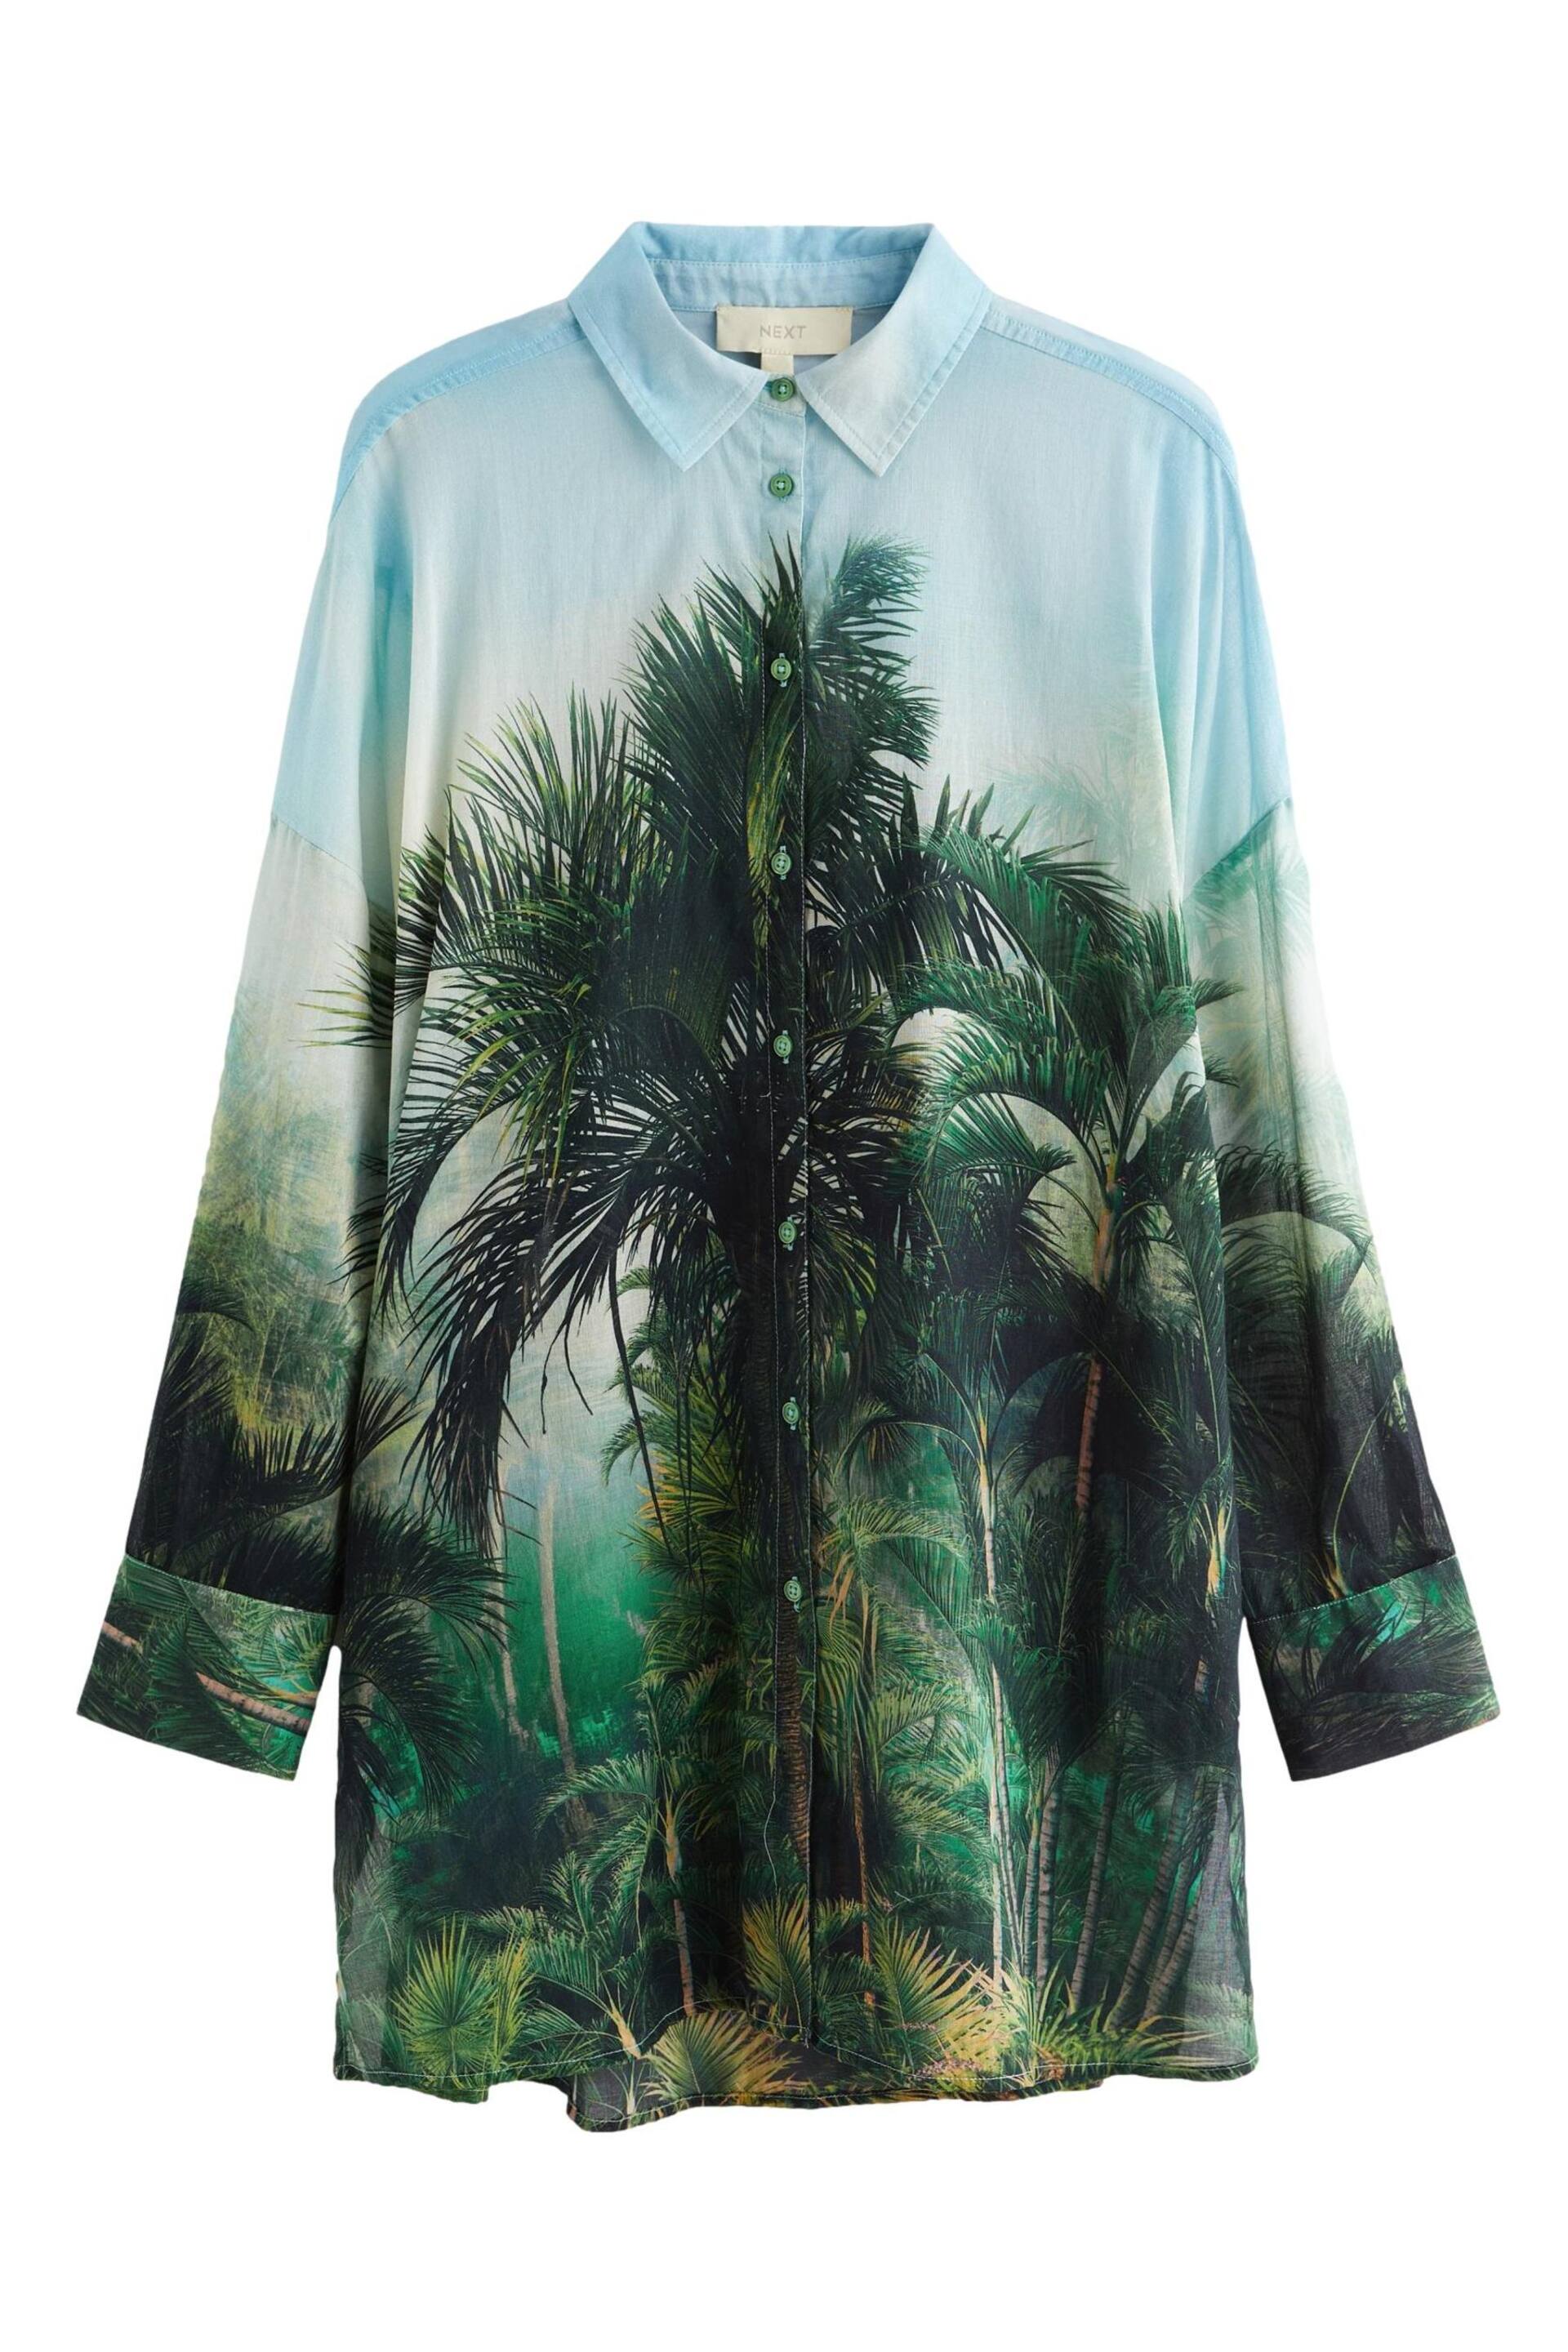 Green/Blue Scene Print Beach Shirt Cover-Up - Image 8 of 8